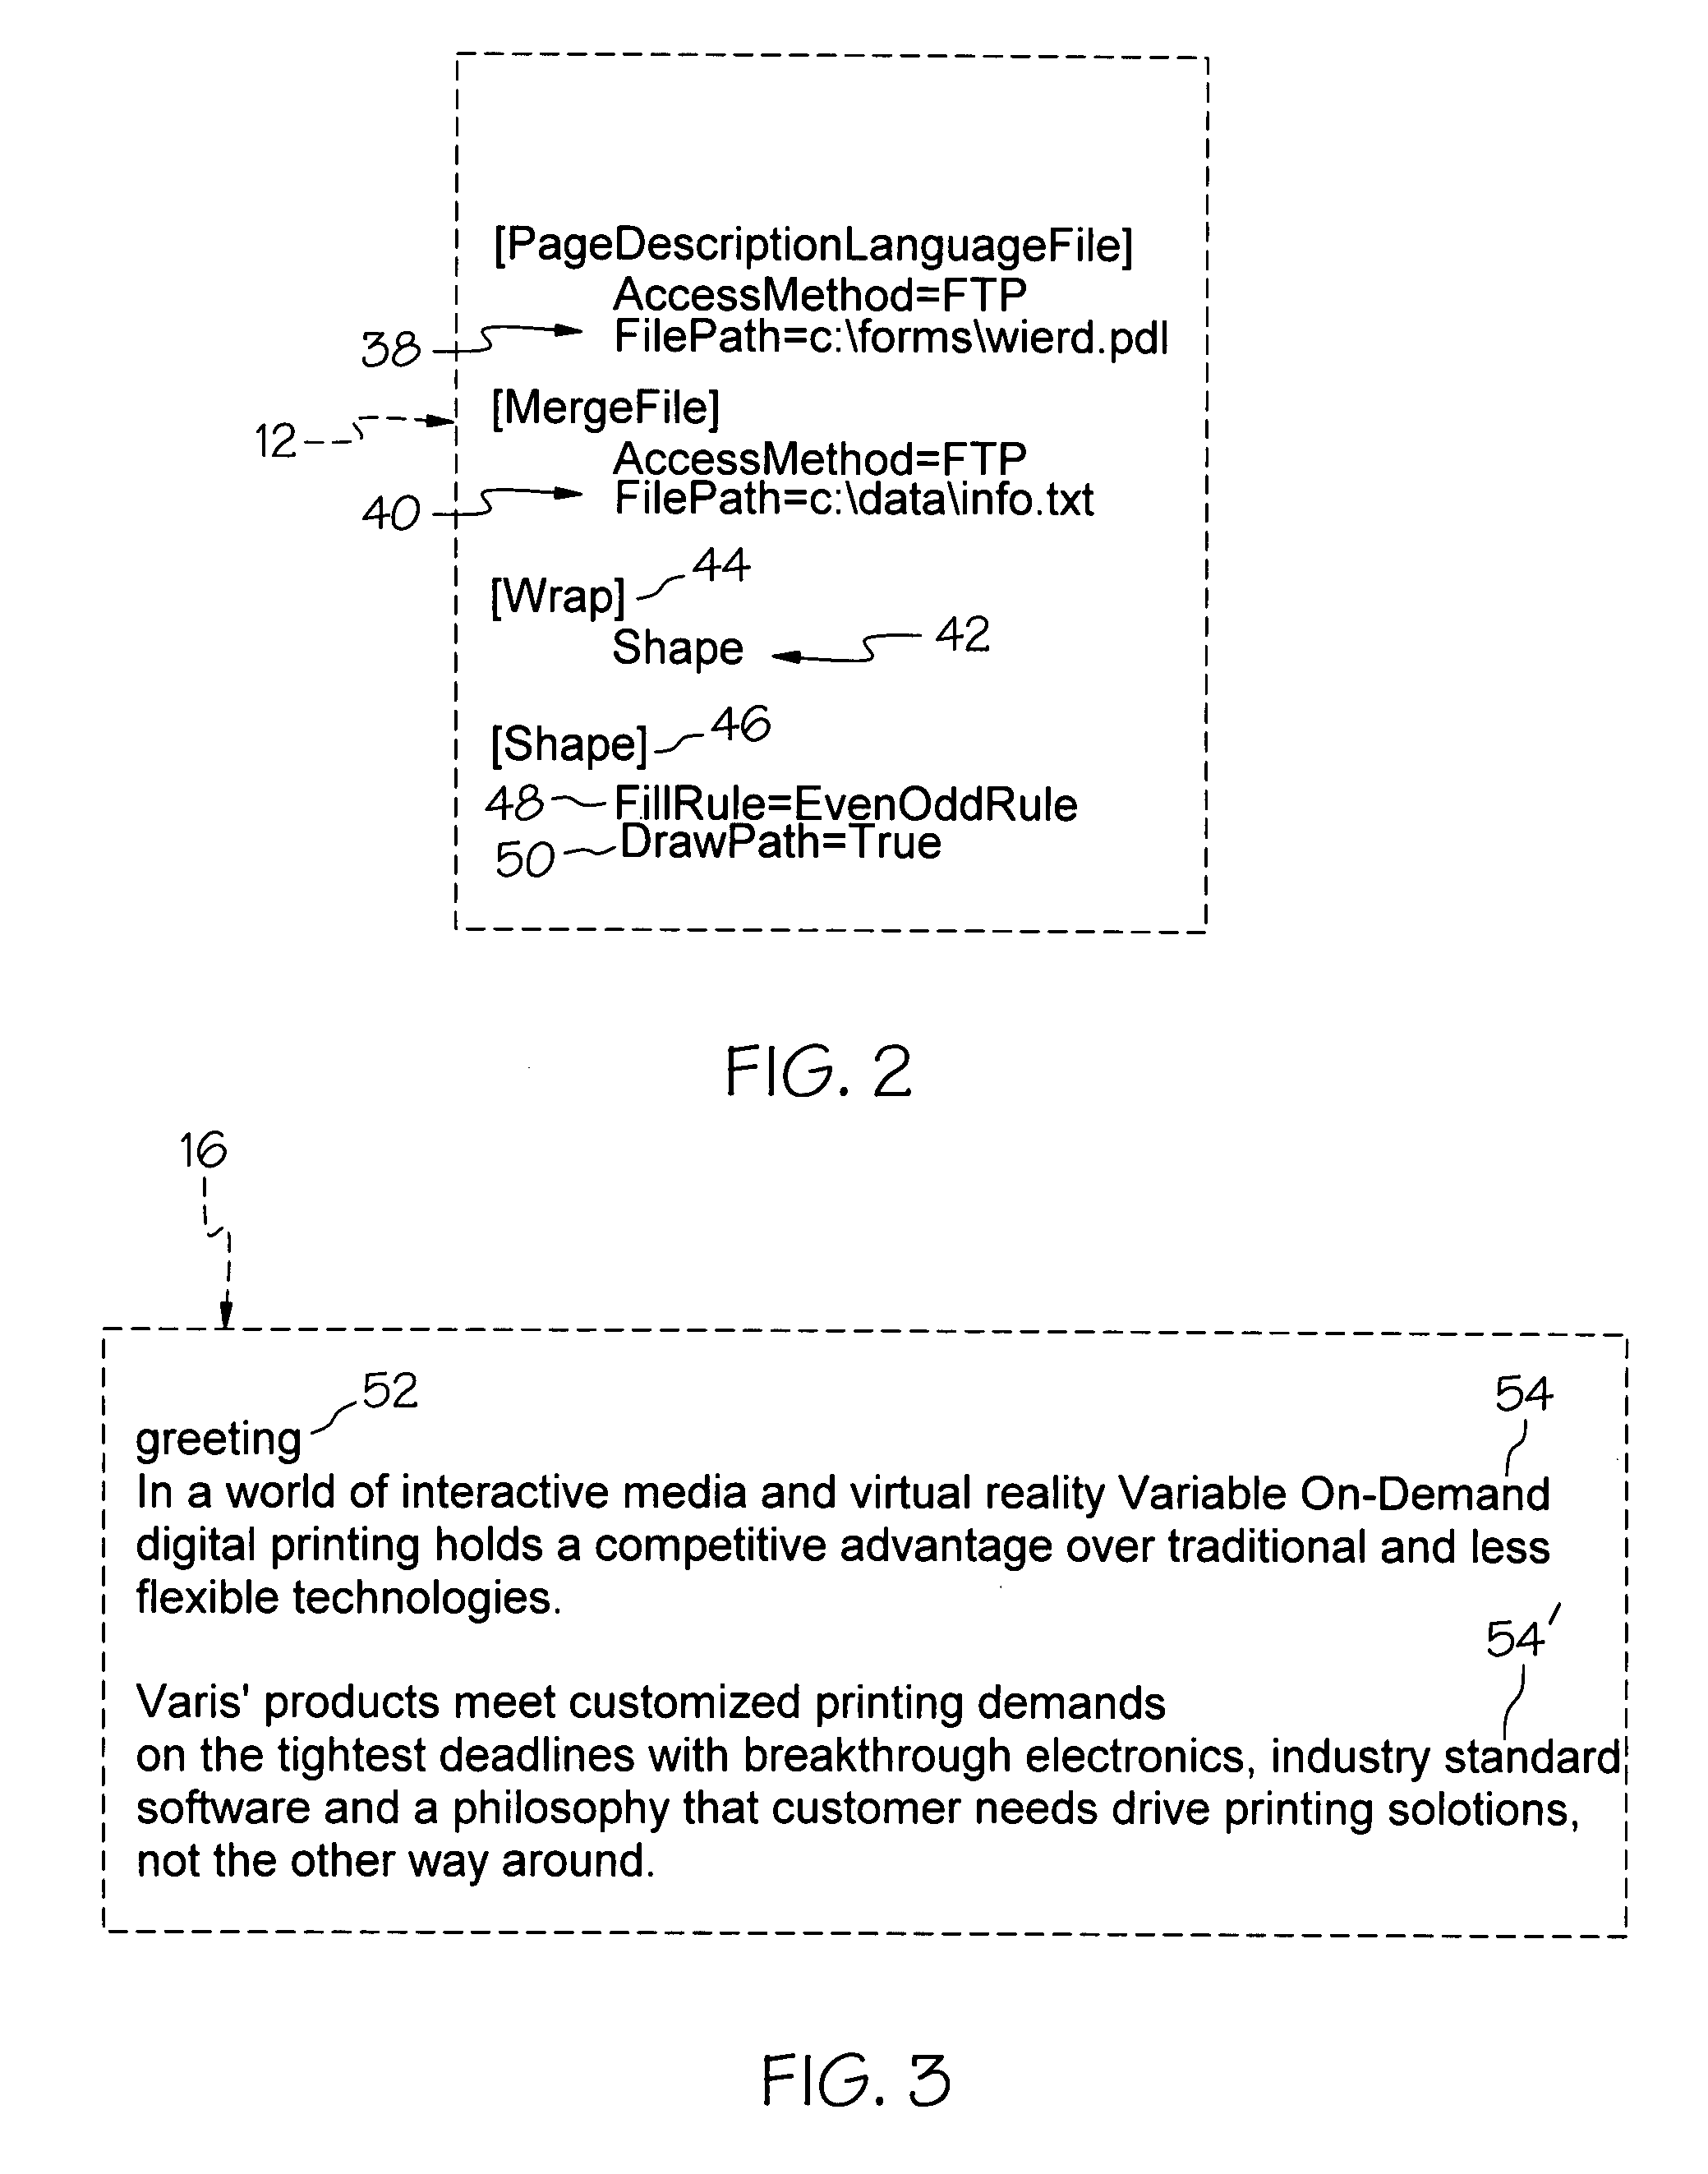 Method and system for dynamic flowing data to an arbitrary path defined by a page description language